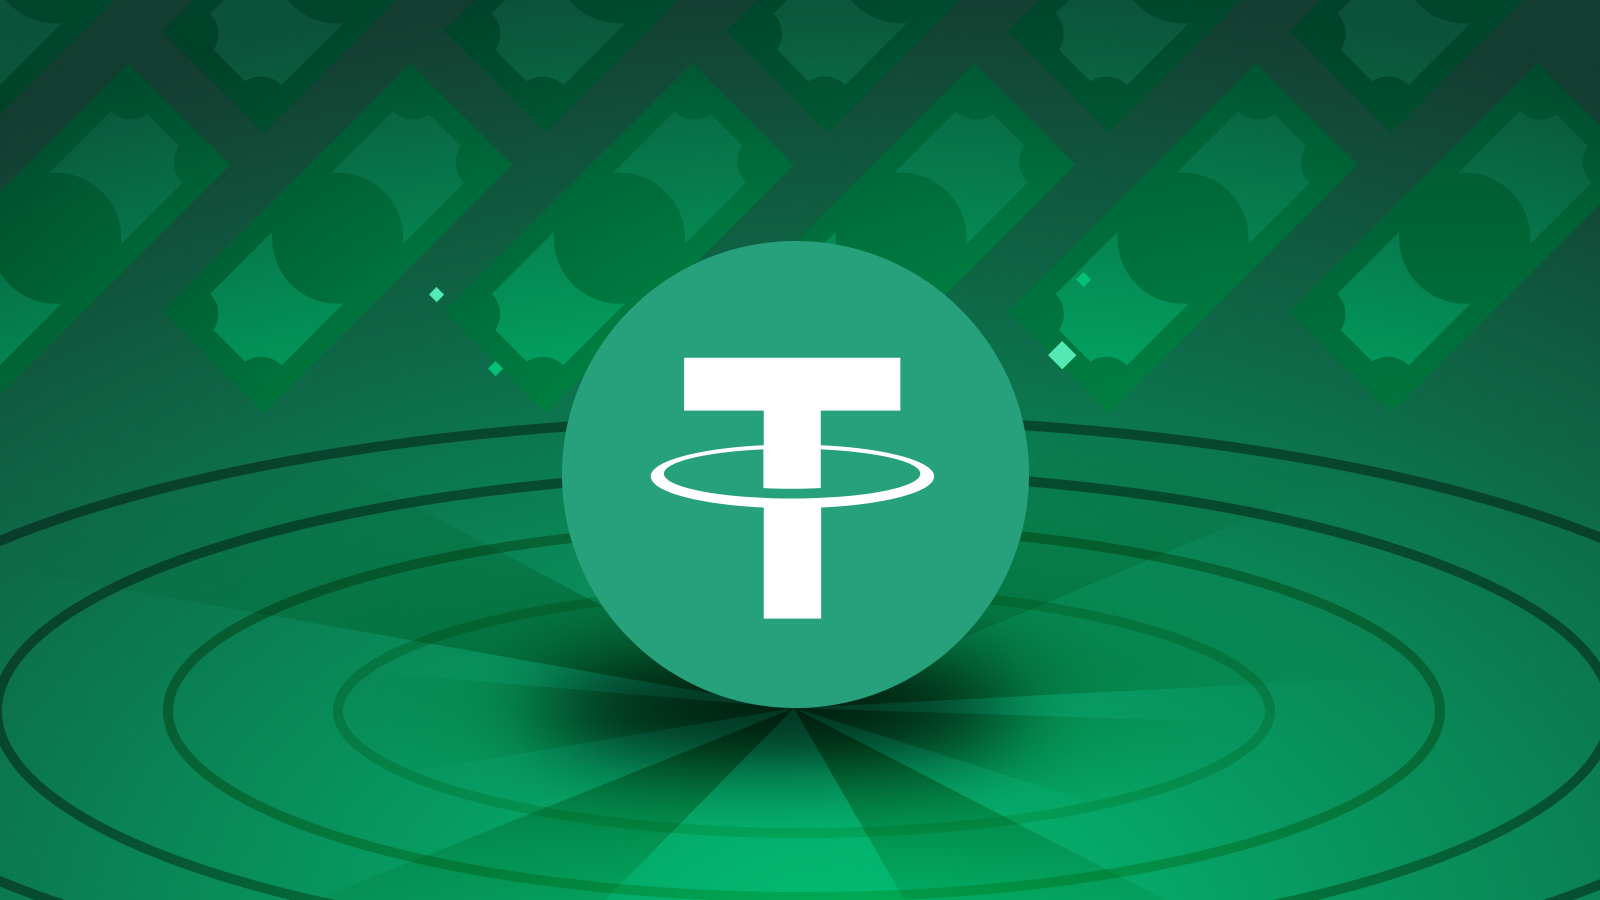 The USDT stablecoin issuer, Tether, attracted a massive net profit of $4.52 billion in the first quarter of FY24, setting a record for the company.